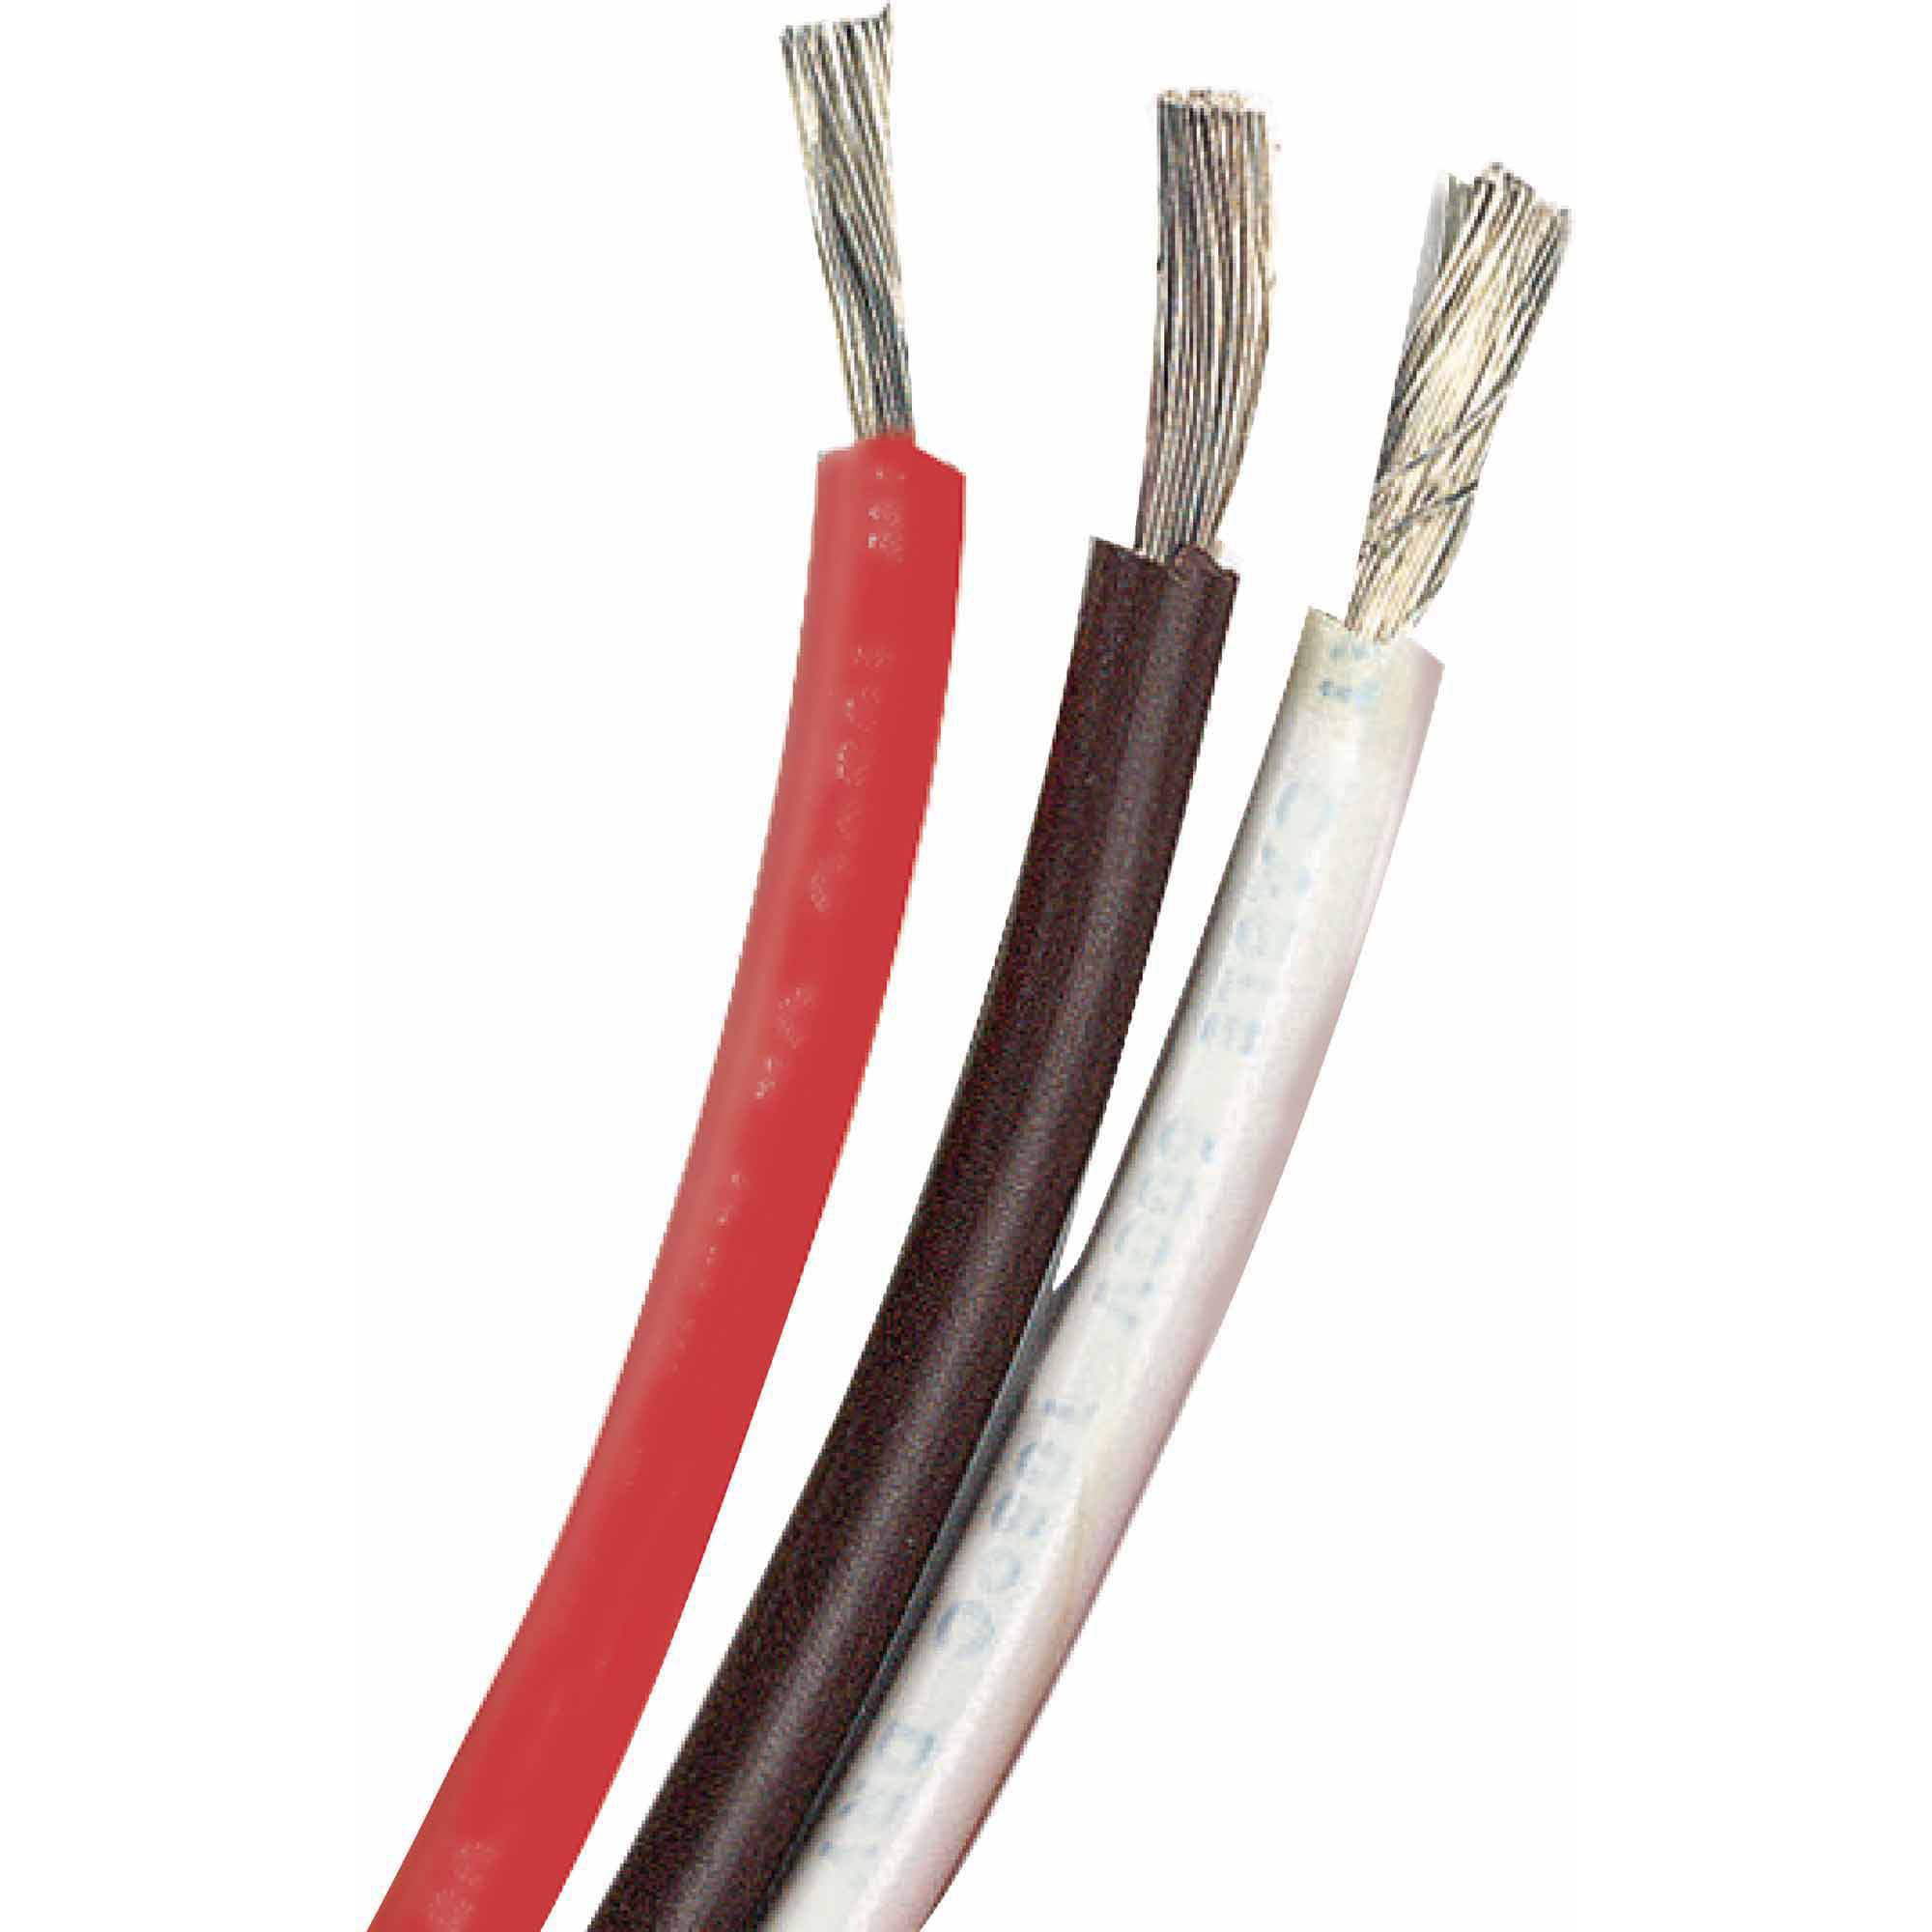 18 GAUGE POWER WIRE RED & BLACK 100 FT EACH PRIMARY AWG STRANDED MARINE GRADE